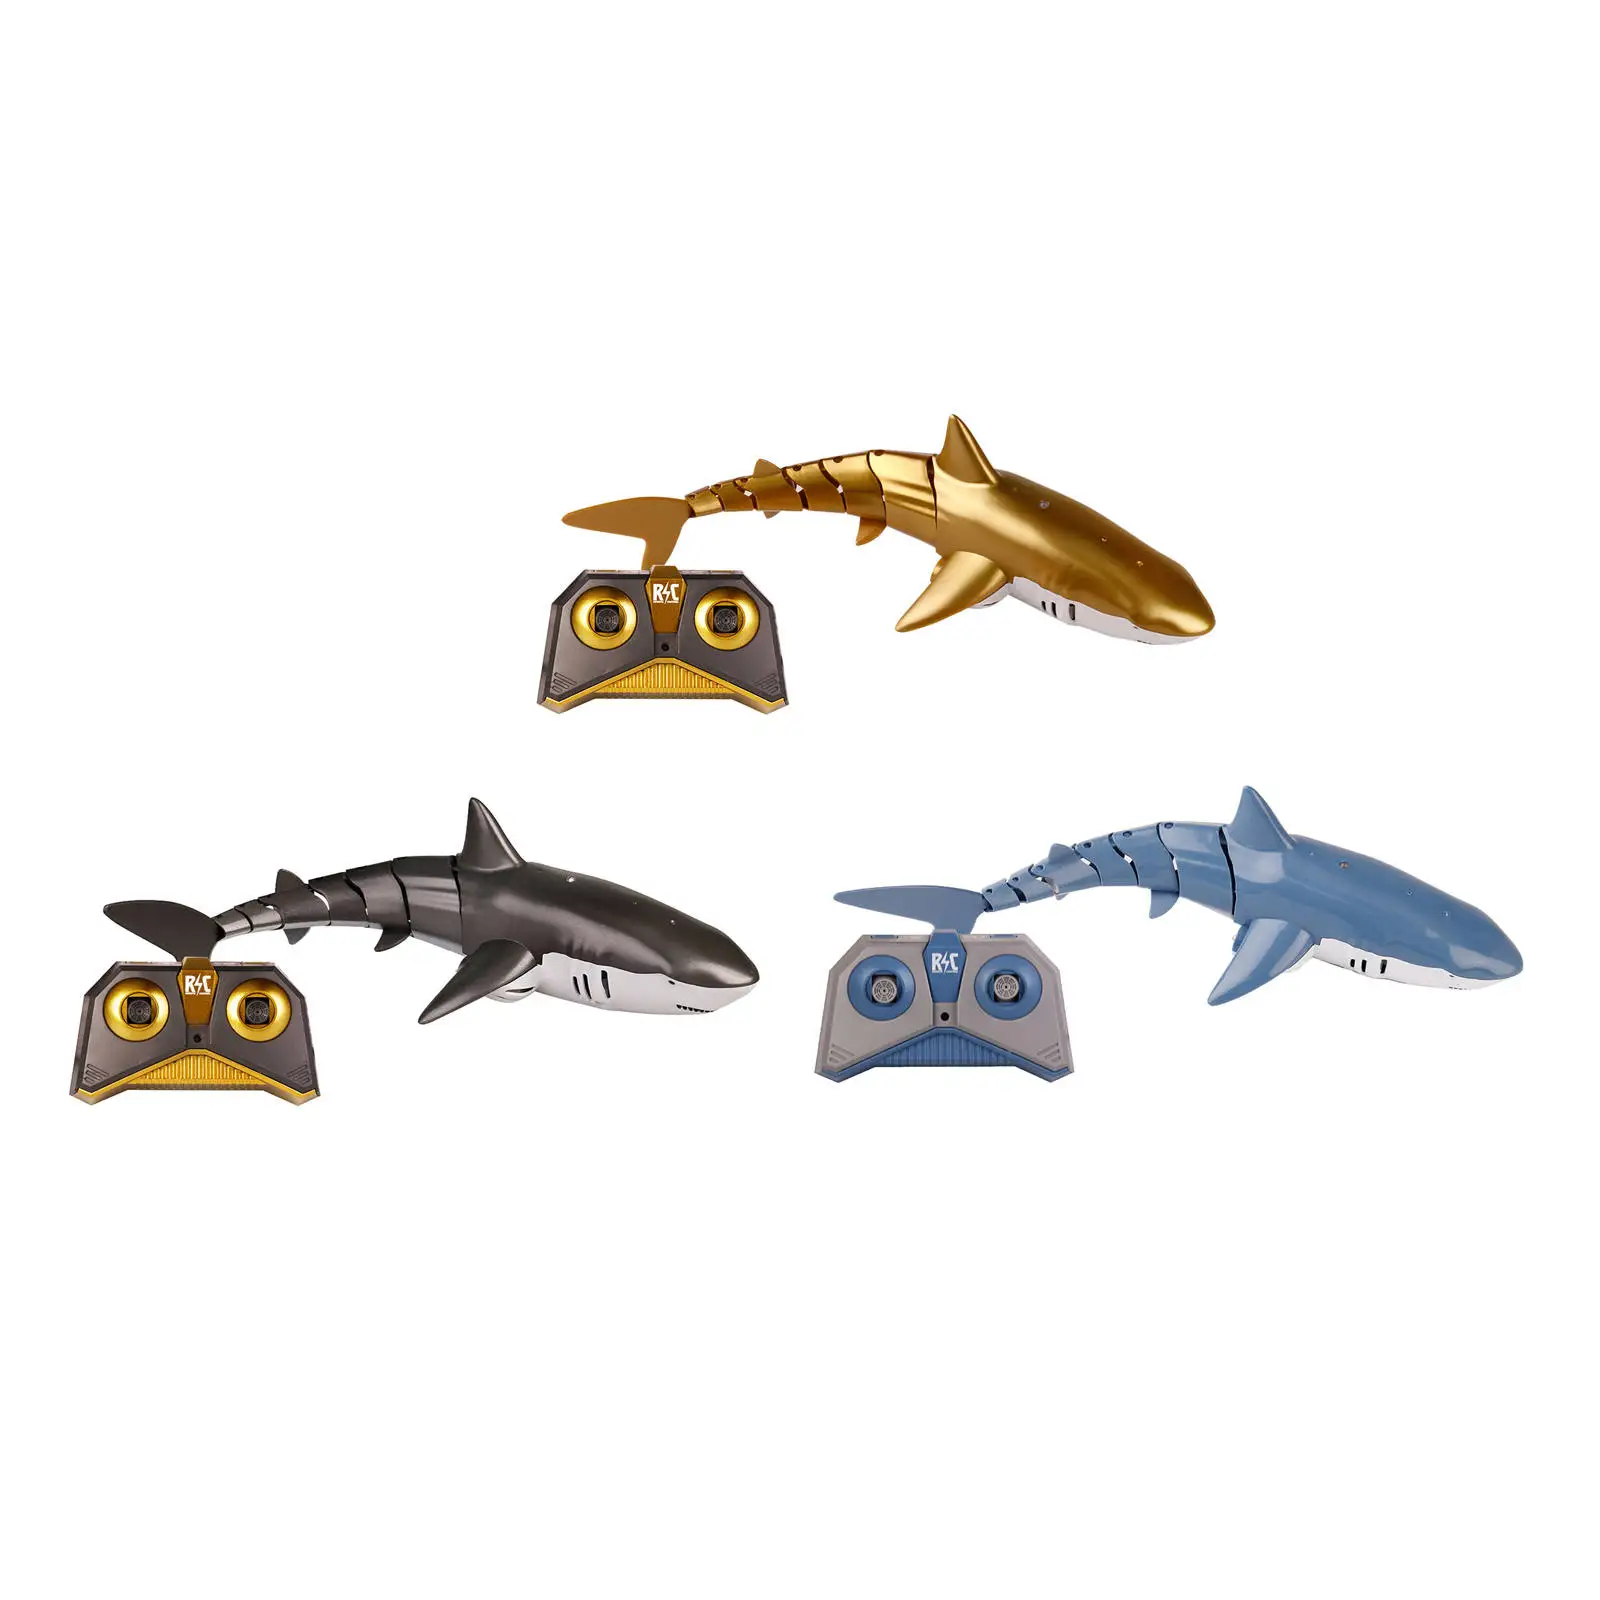 RC 1:18 High Simulation Shark Toys 2.4G Waterproof Electric Remote Control Shark Boat Swimming Pool Bathroom Children Toys Gift